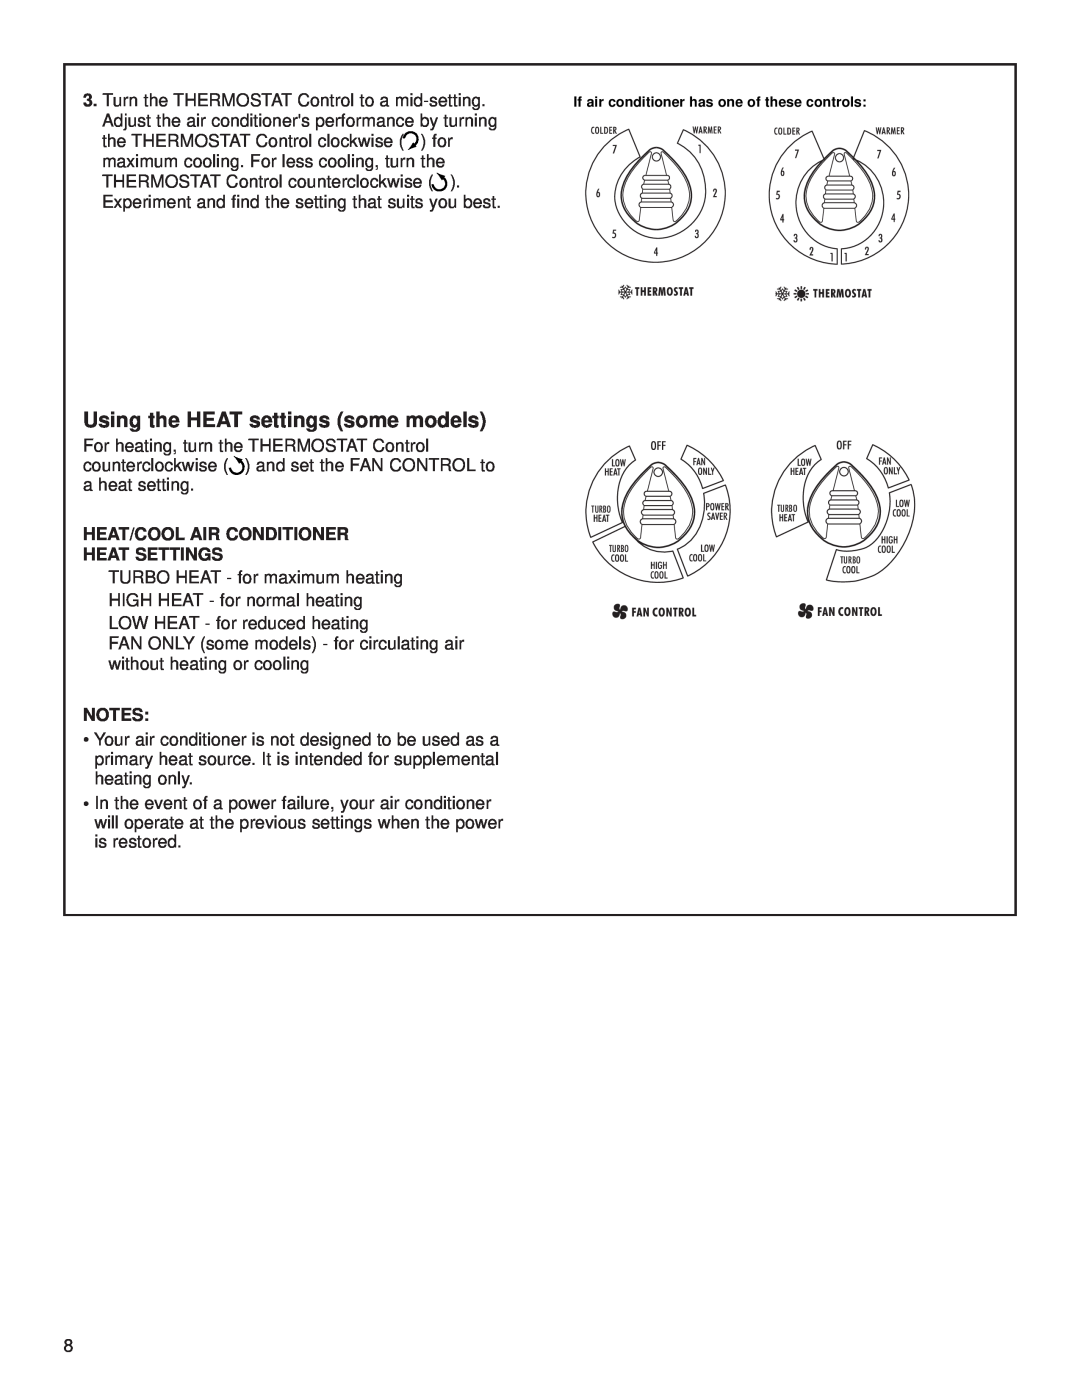 Whirlpool ACE184XL0 manual Using the HEAT settings some models, Heat/Cool Air Conditioner Heat Settings 